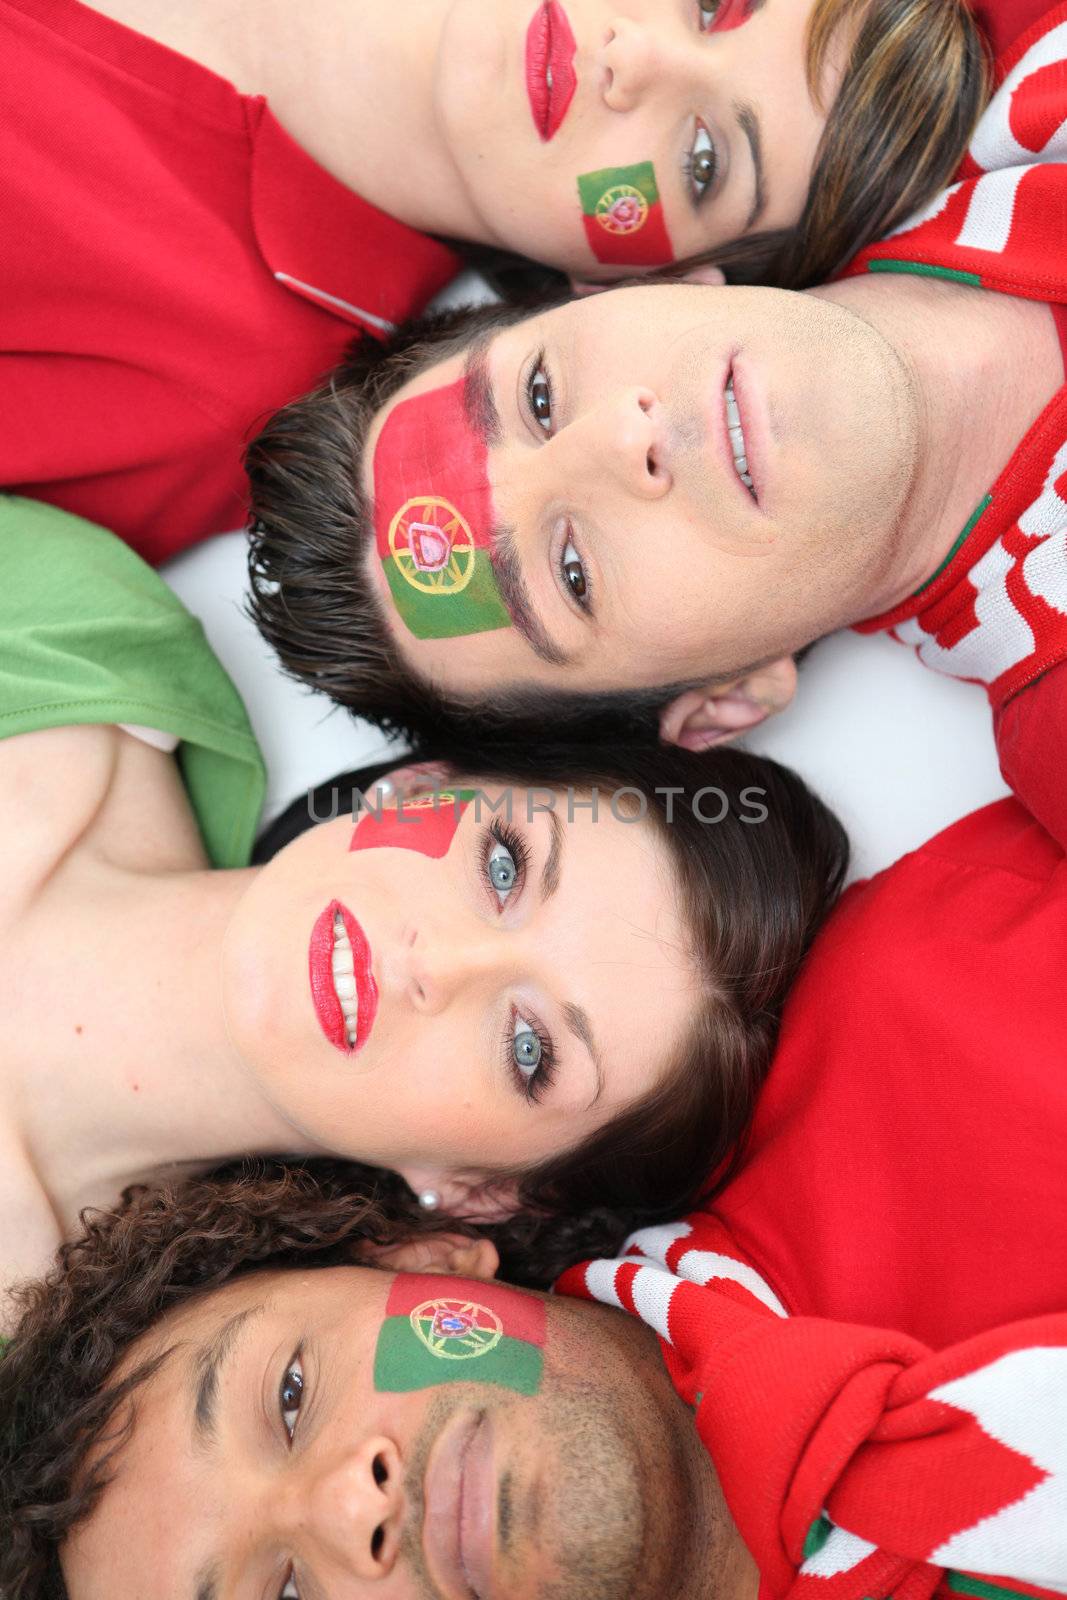 Four Portuguese soccer fans laying down together